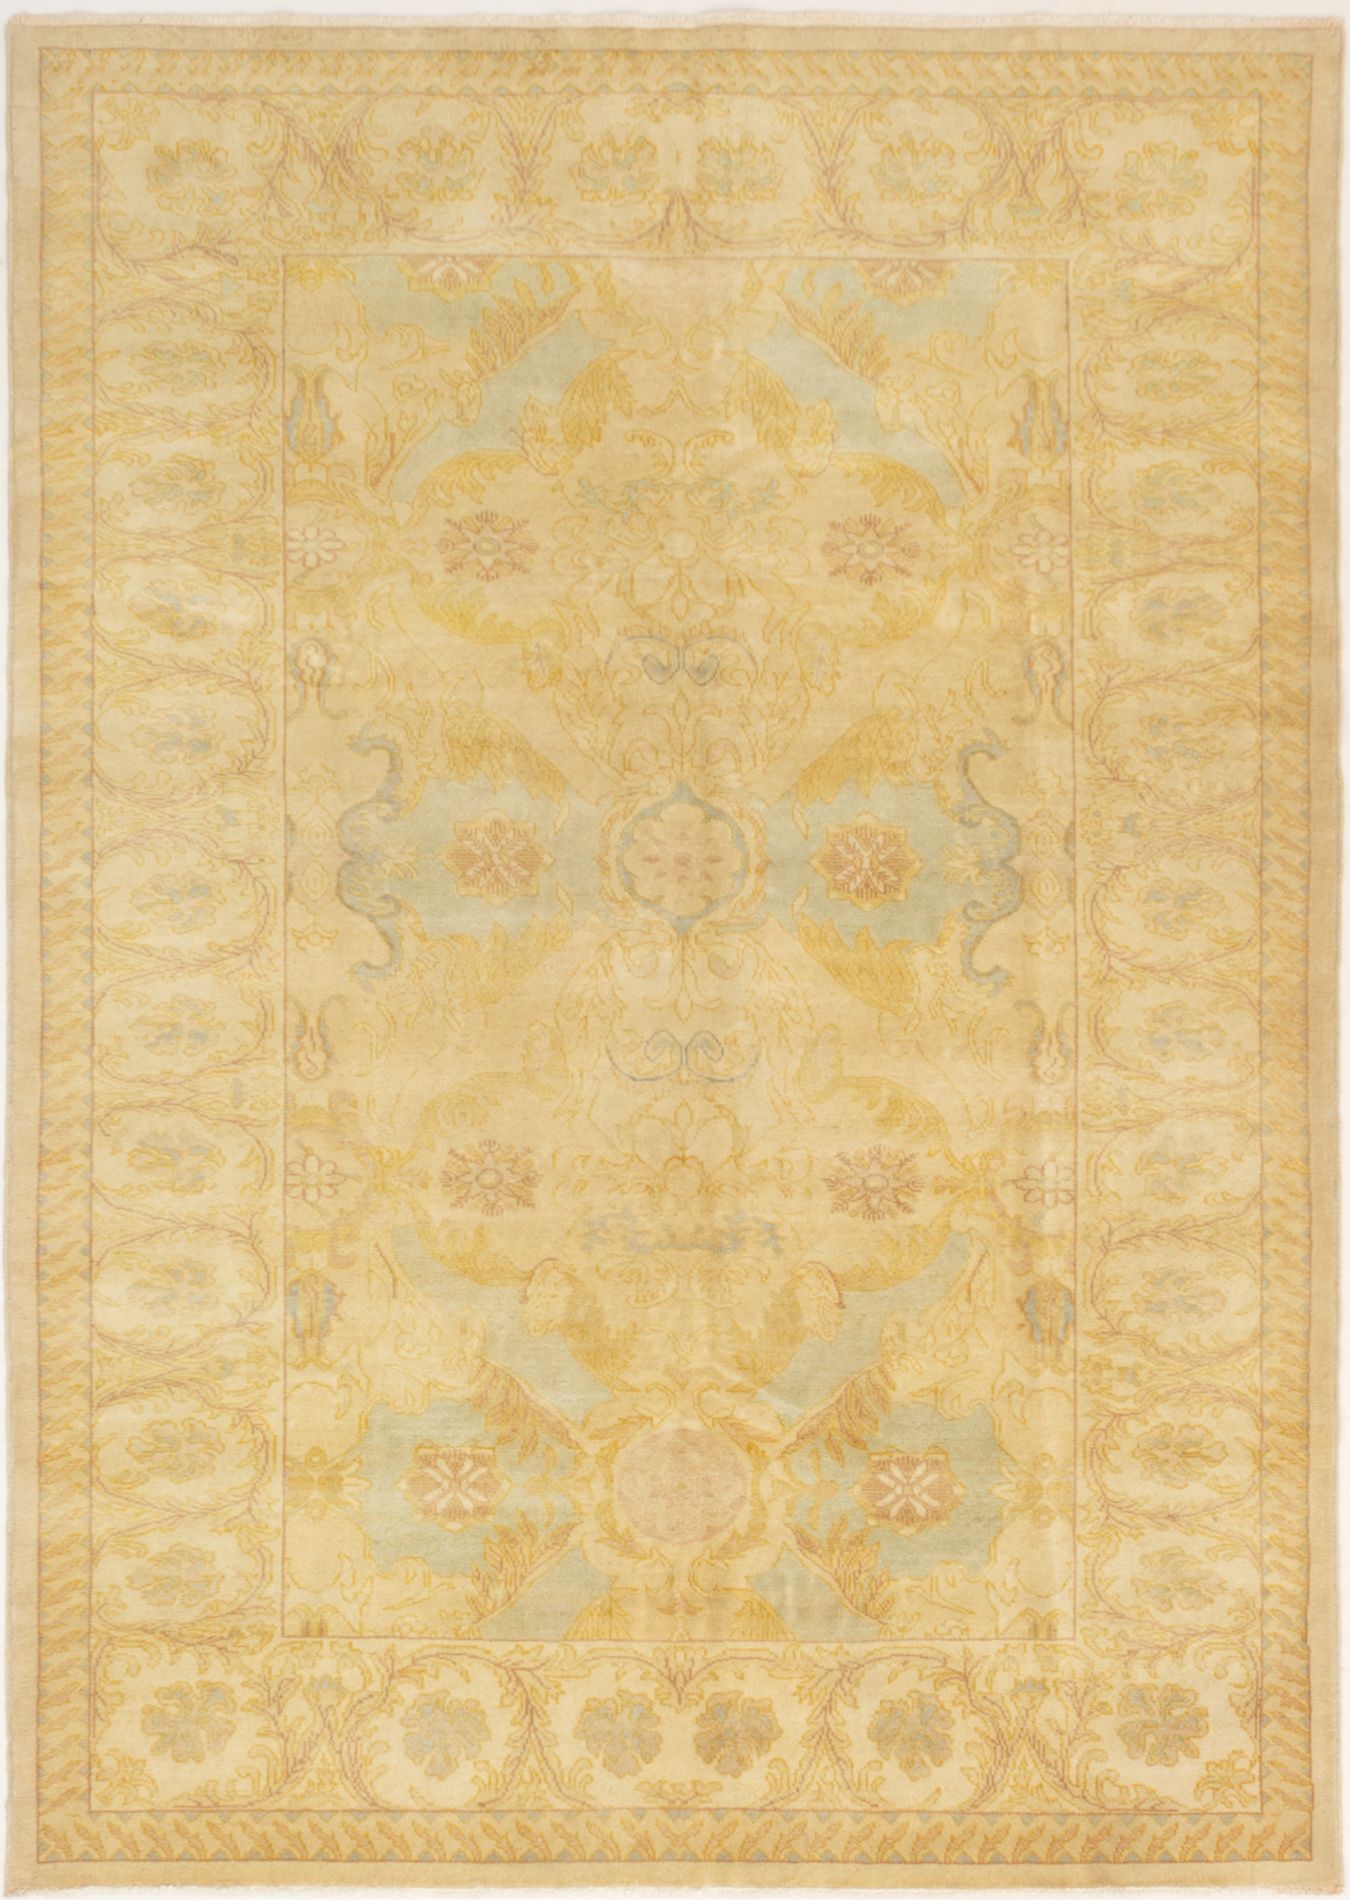 Hand-knotted Authentic Ushak Cream Wool Rug 6'4" x 8'11" Size: 6'4" x 8'11"  